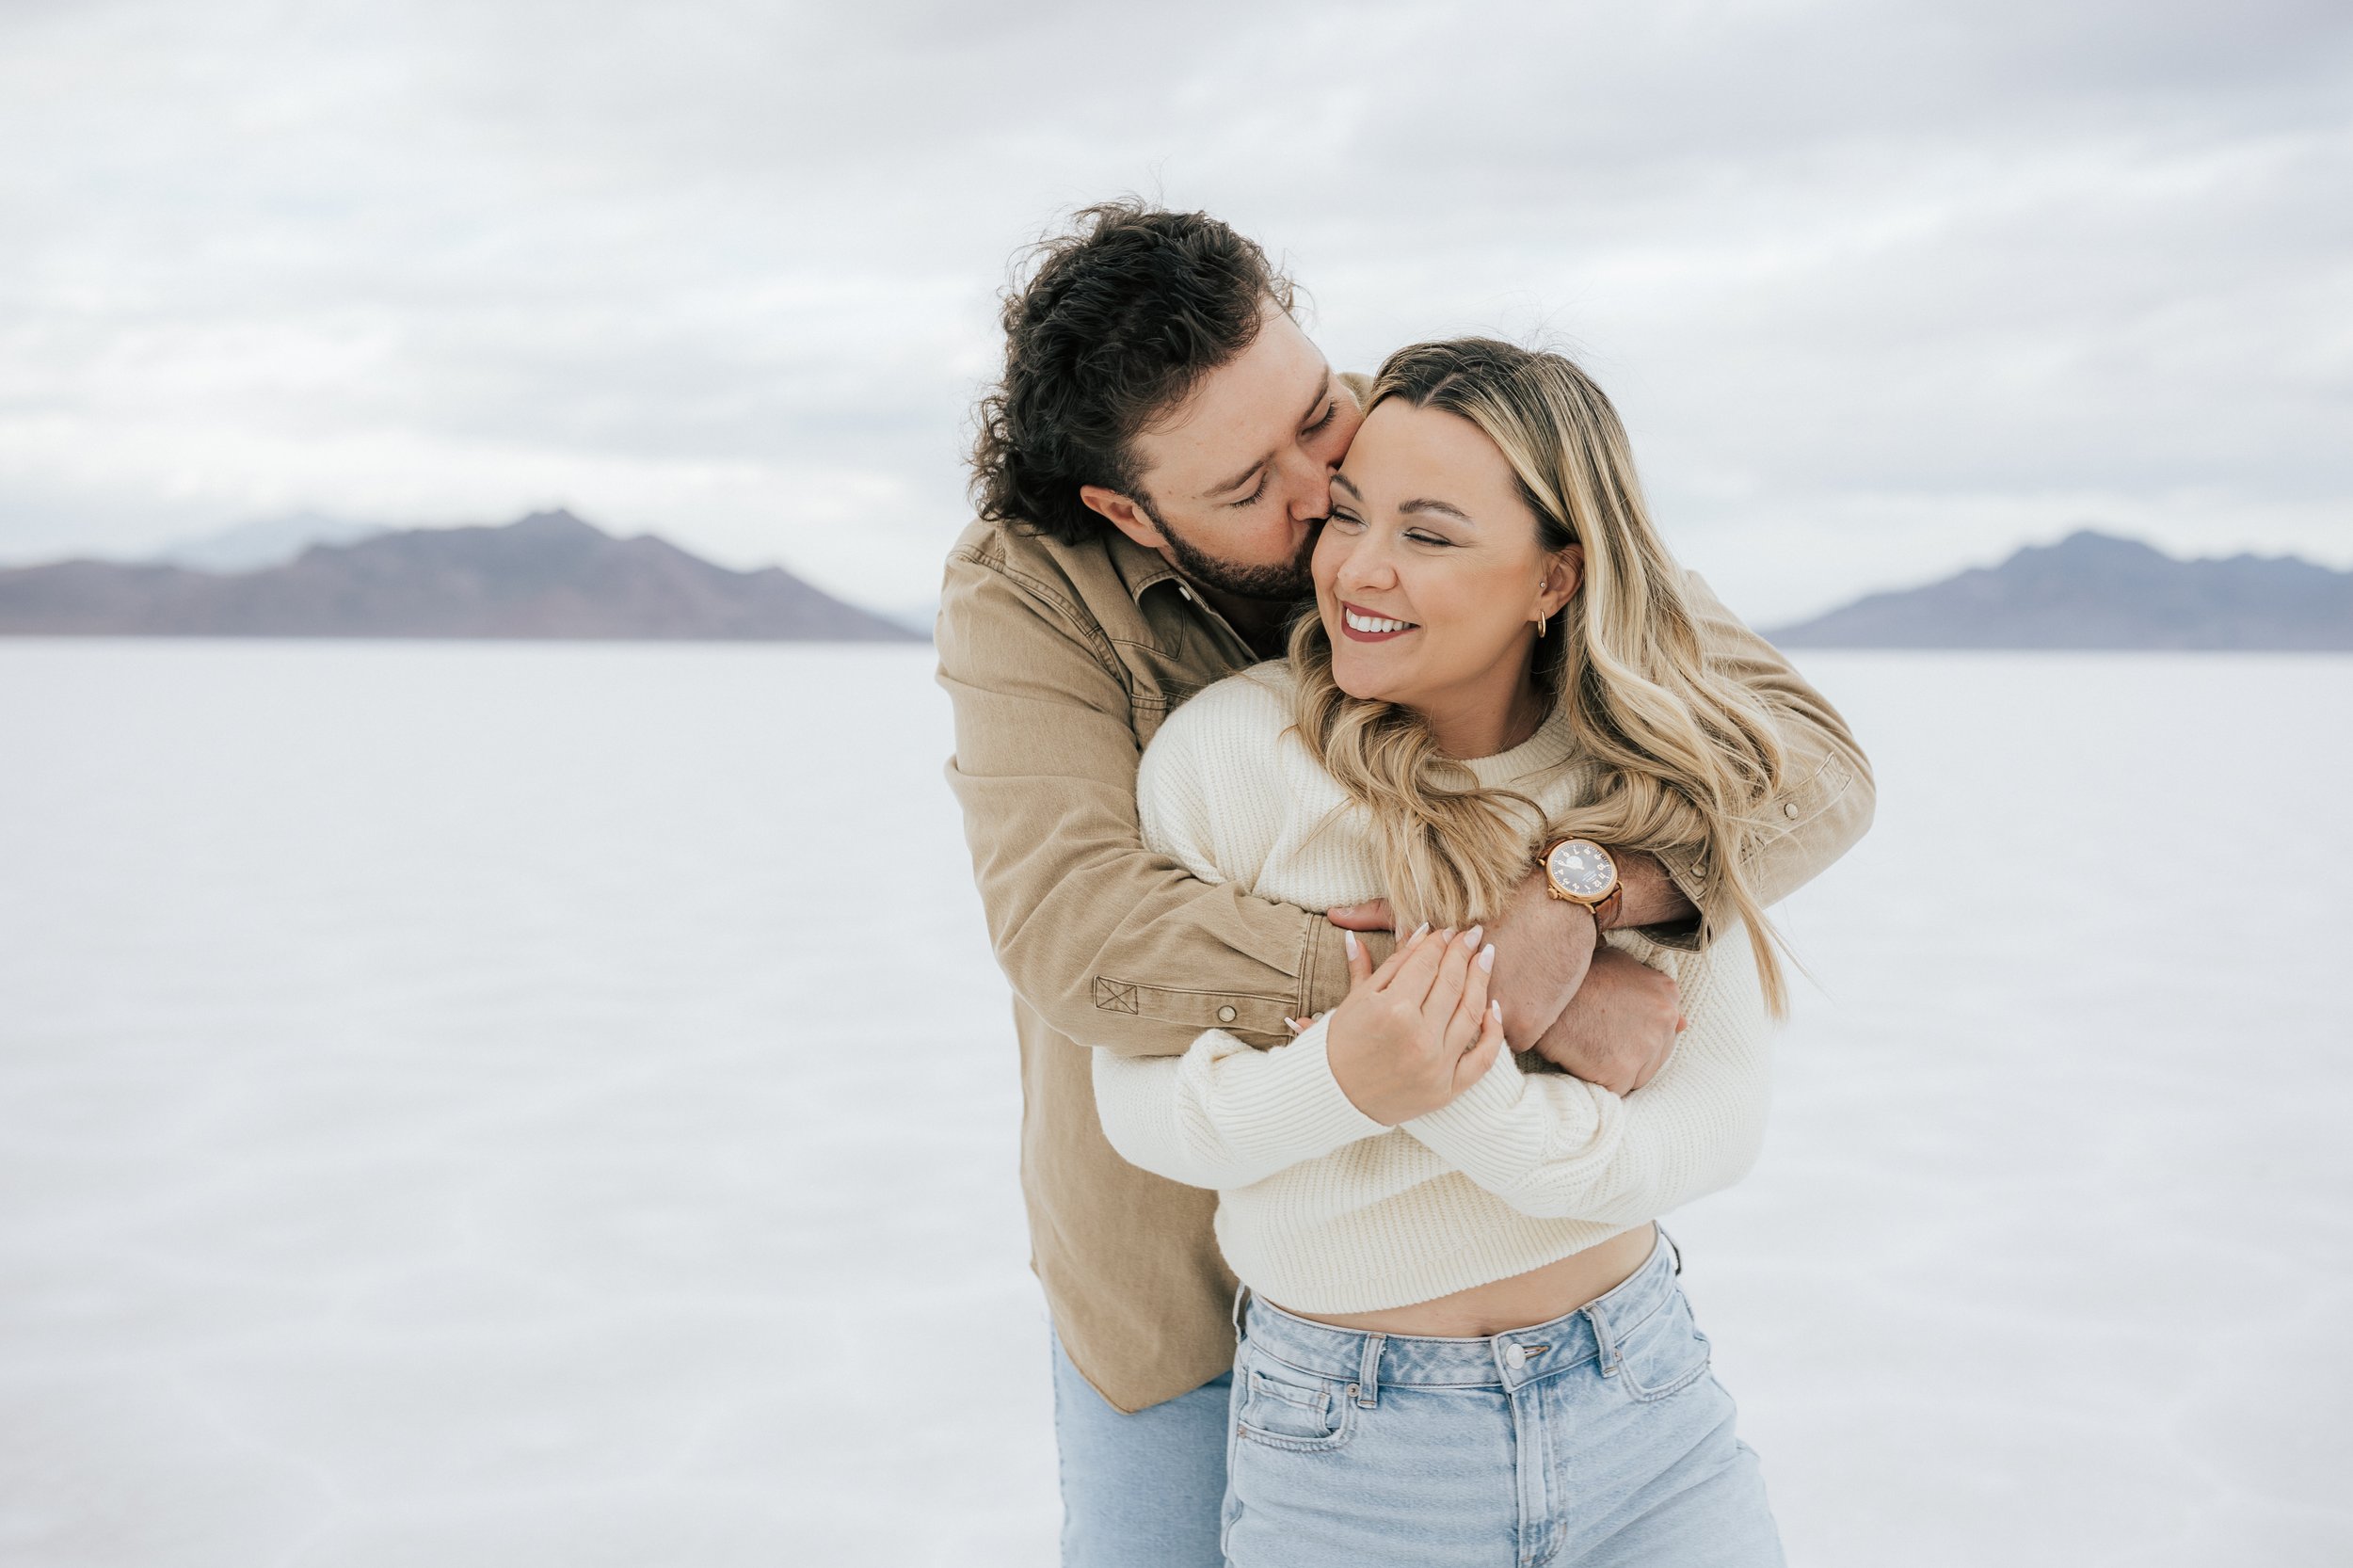  An engaged couple laughs and hugs as they pose for a photo at the Bonneville Salt Flats near Wendover, Nevada and Salt Lake City, Utah. Man kisses fiance on the cheek. The Salt Flats are white and the sky is overcast. The mountains show behind. Enga